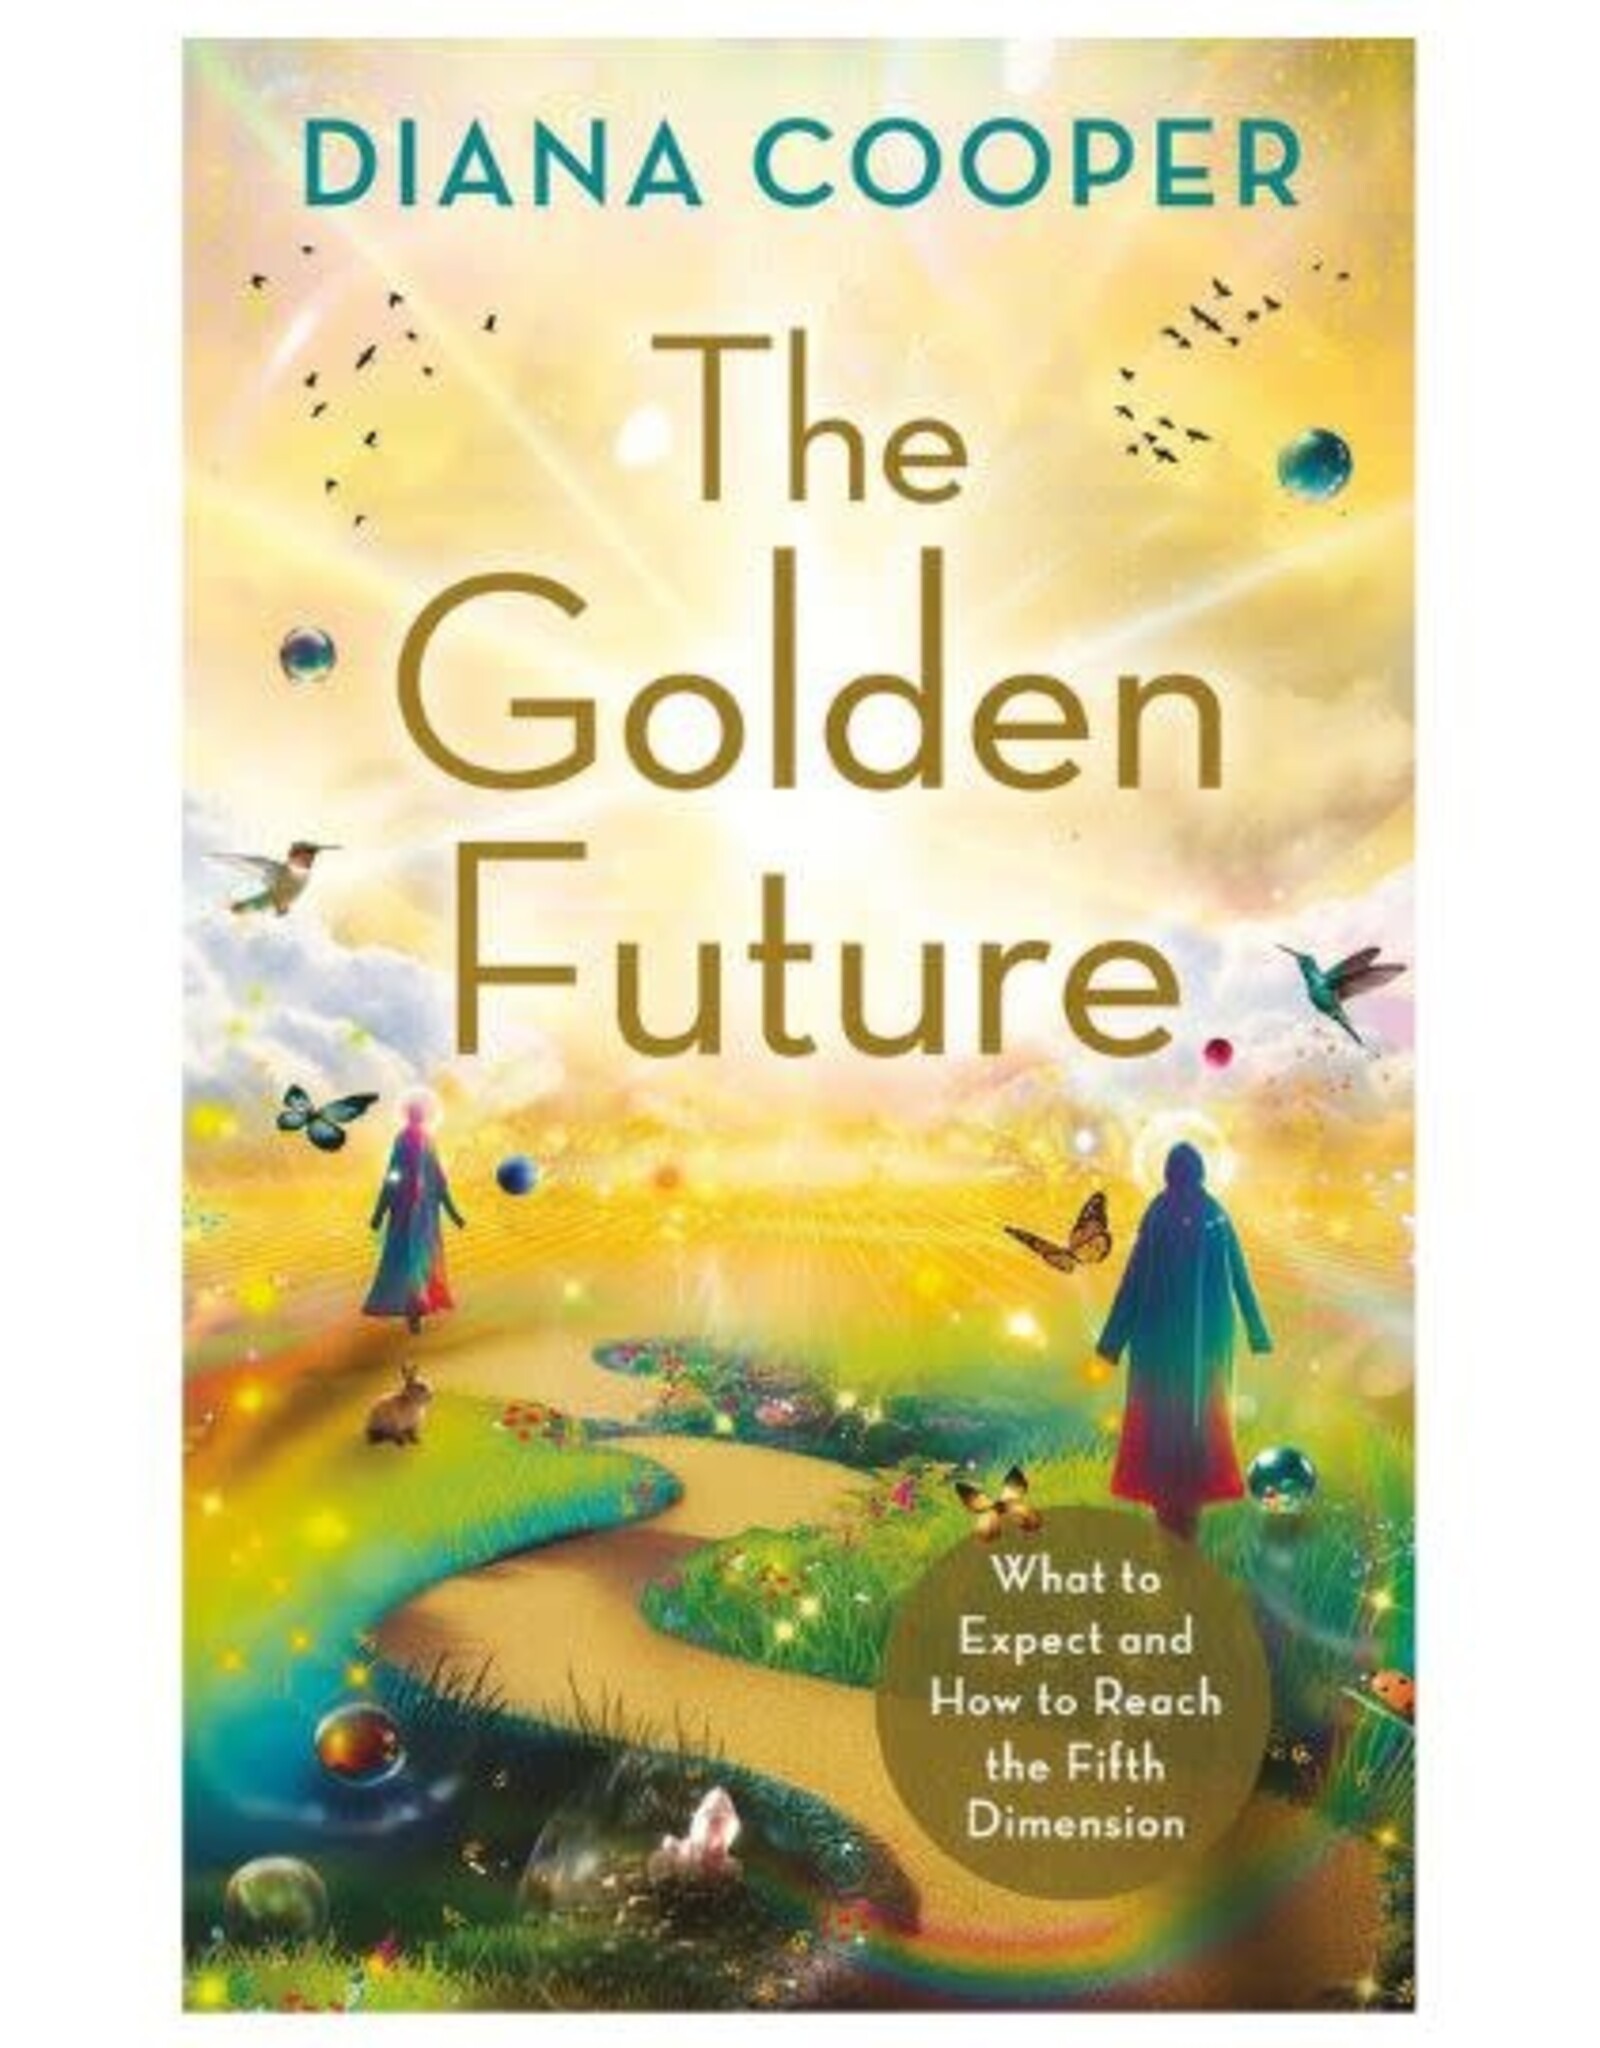 Diana Cooper The Golden Future by Diana Cooper